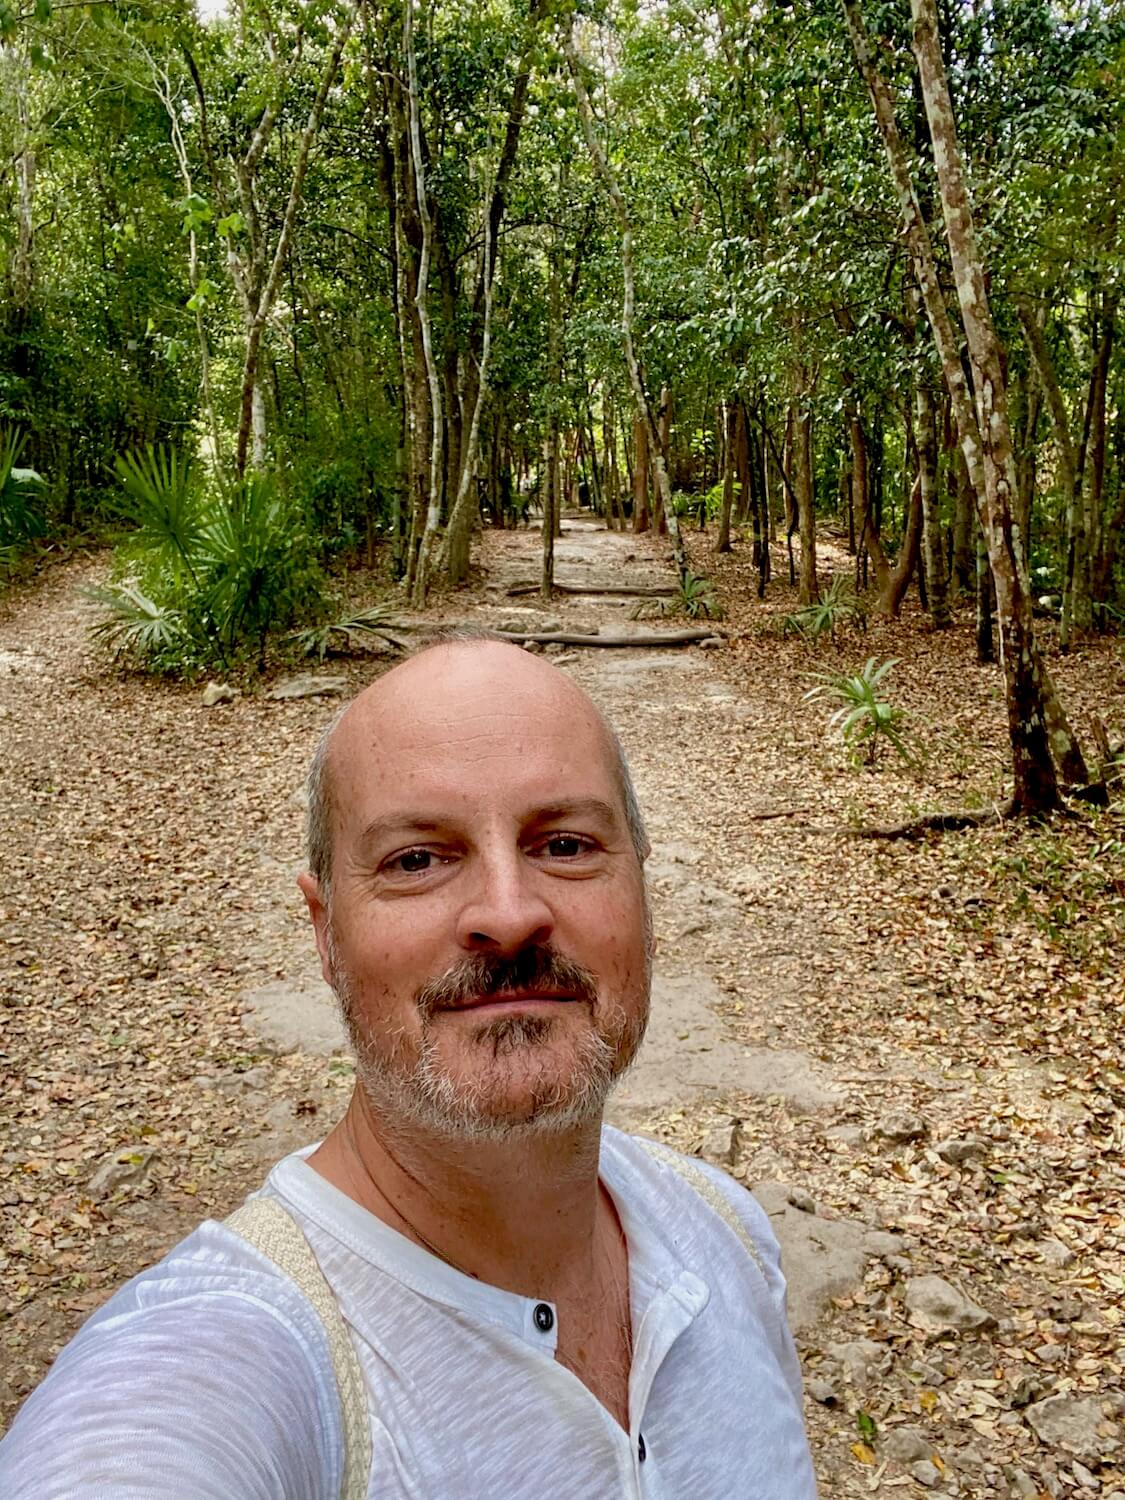 Matthew Kessi walking along the ancient white limestone Sacbé 9 which was used by the Mayans to travel between places.  Jungle life continues to push through the roadway with dense foliage of trees. 